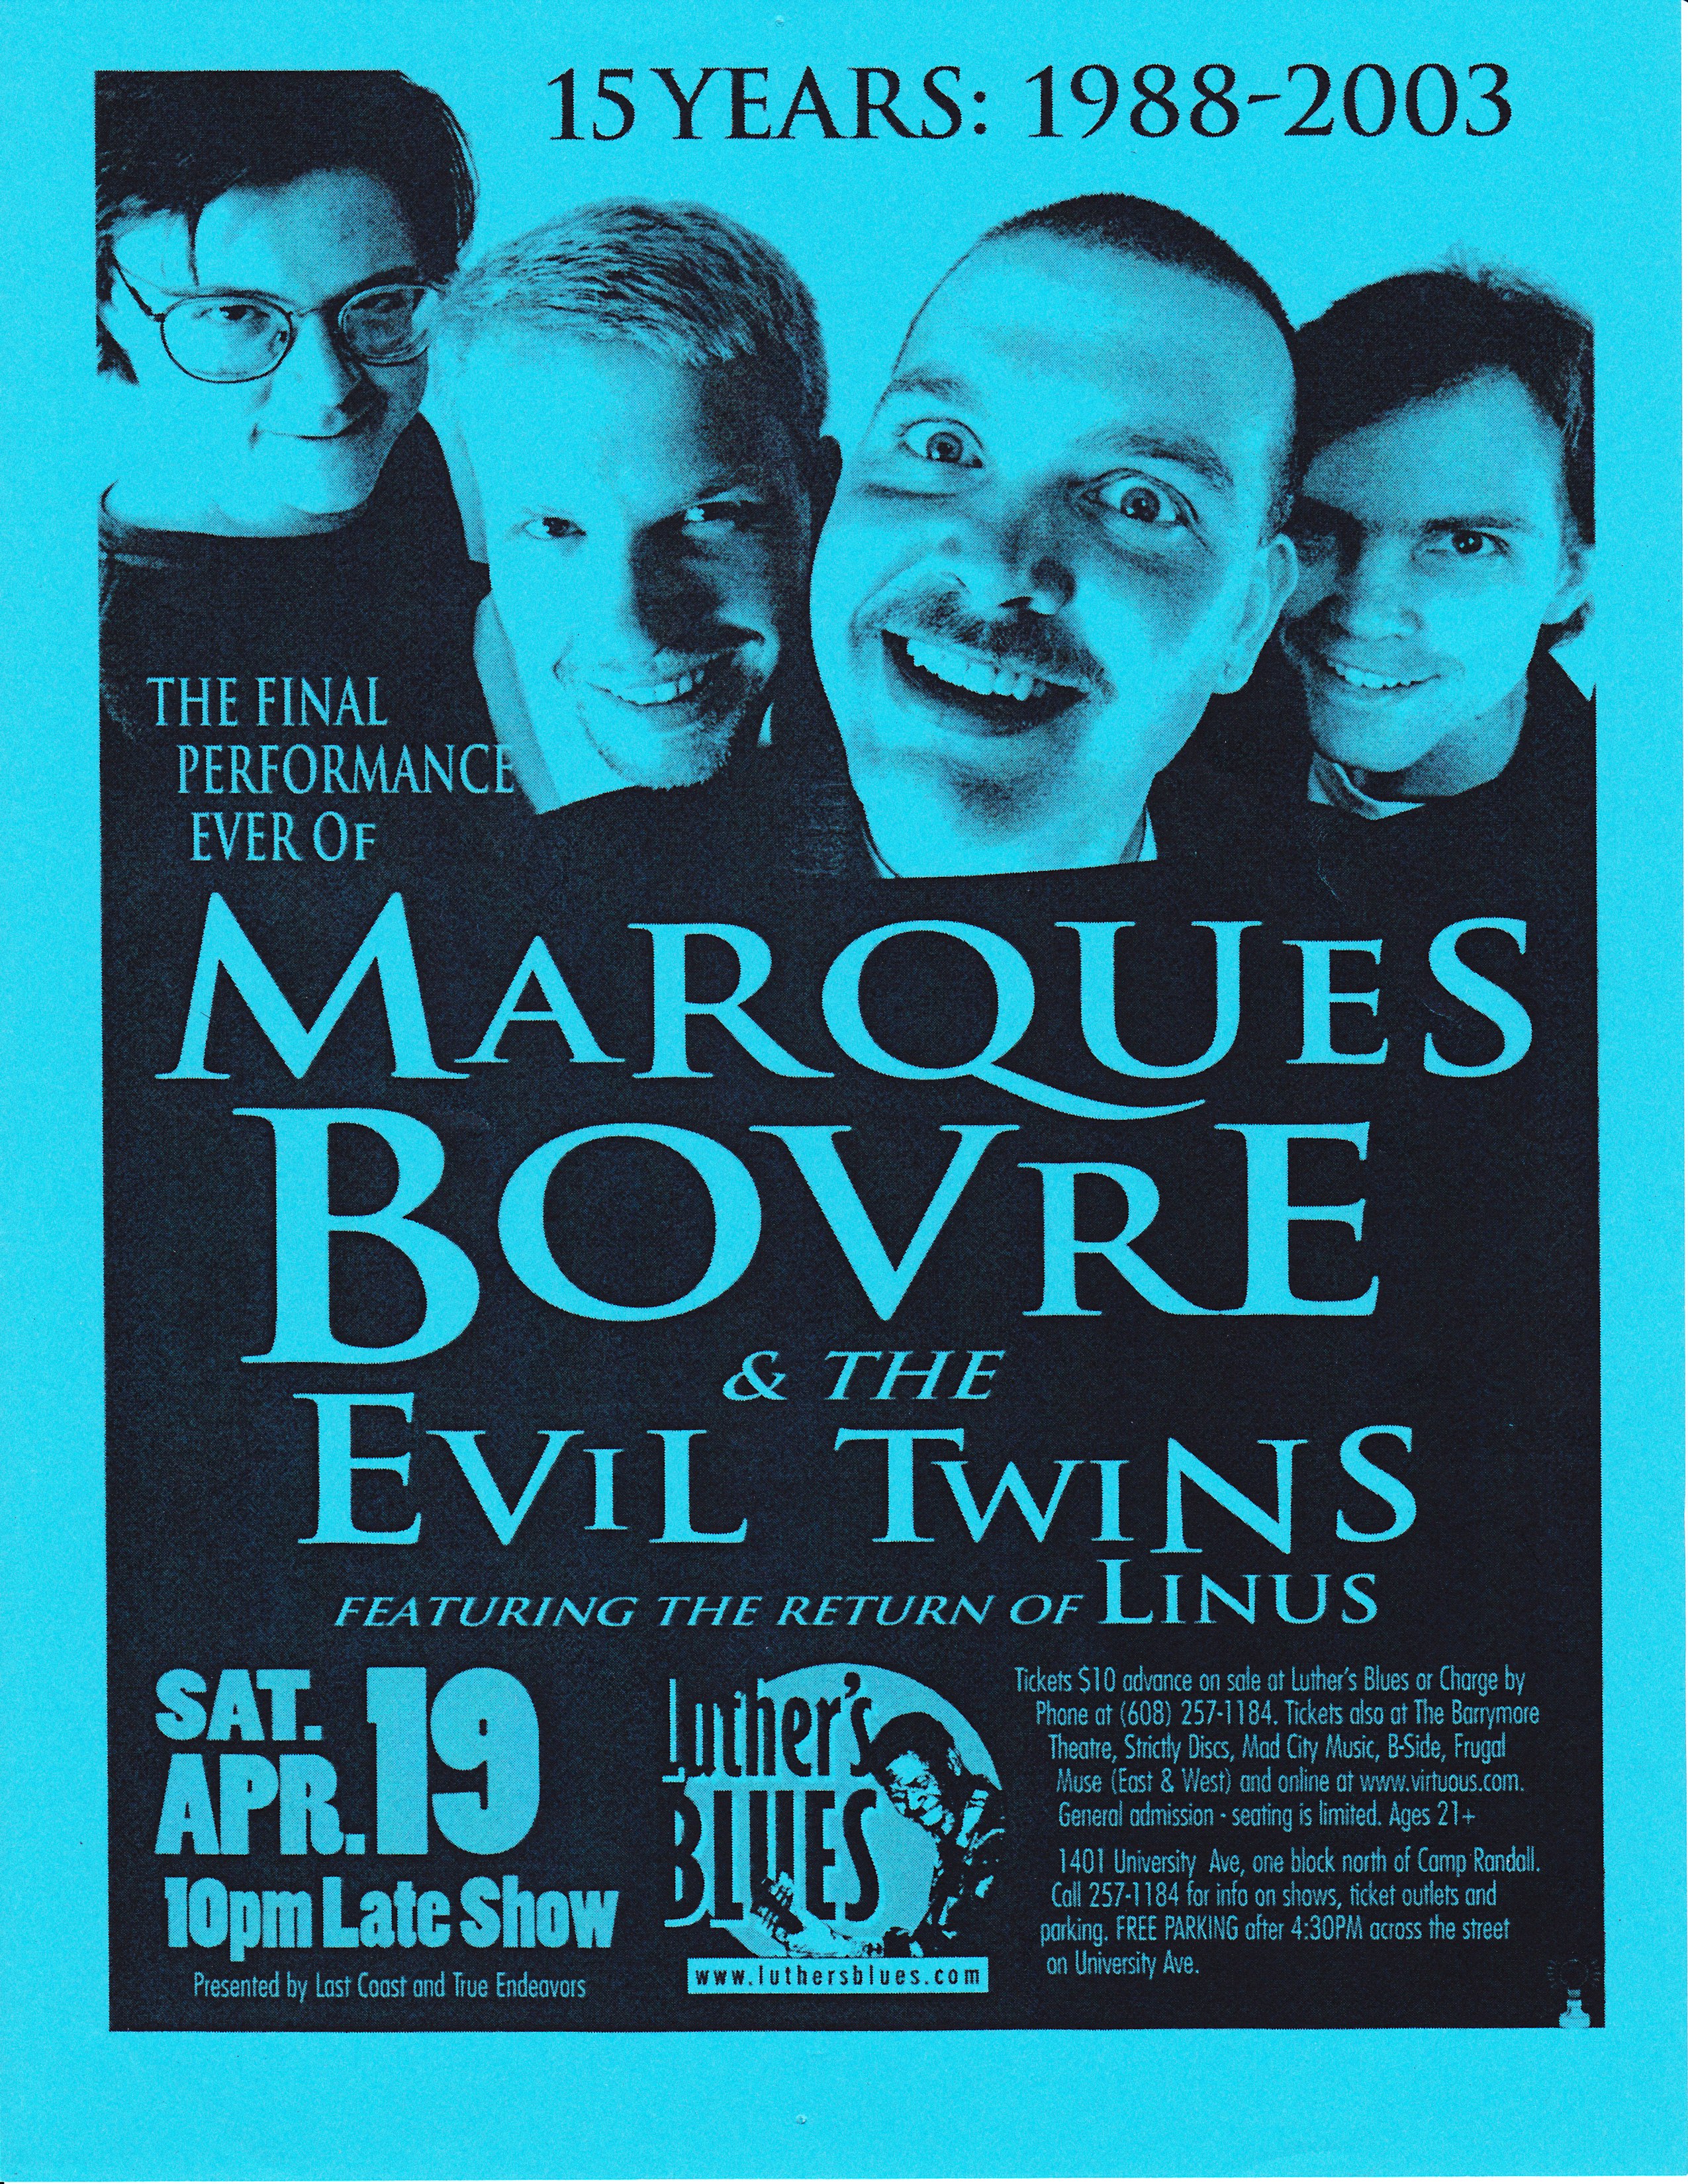 Marques Bovre and the Evil Twins, April 19, 2003